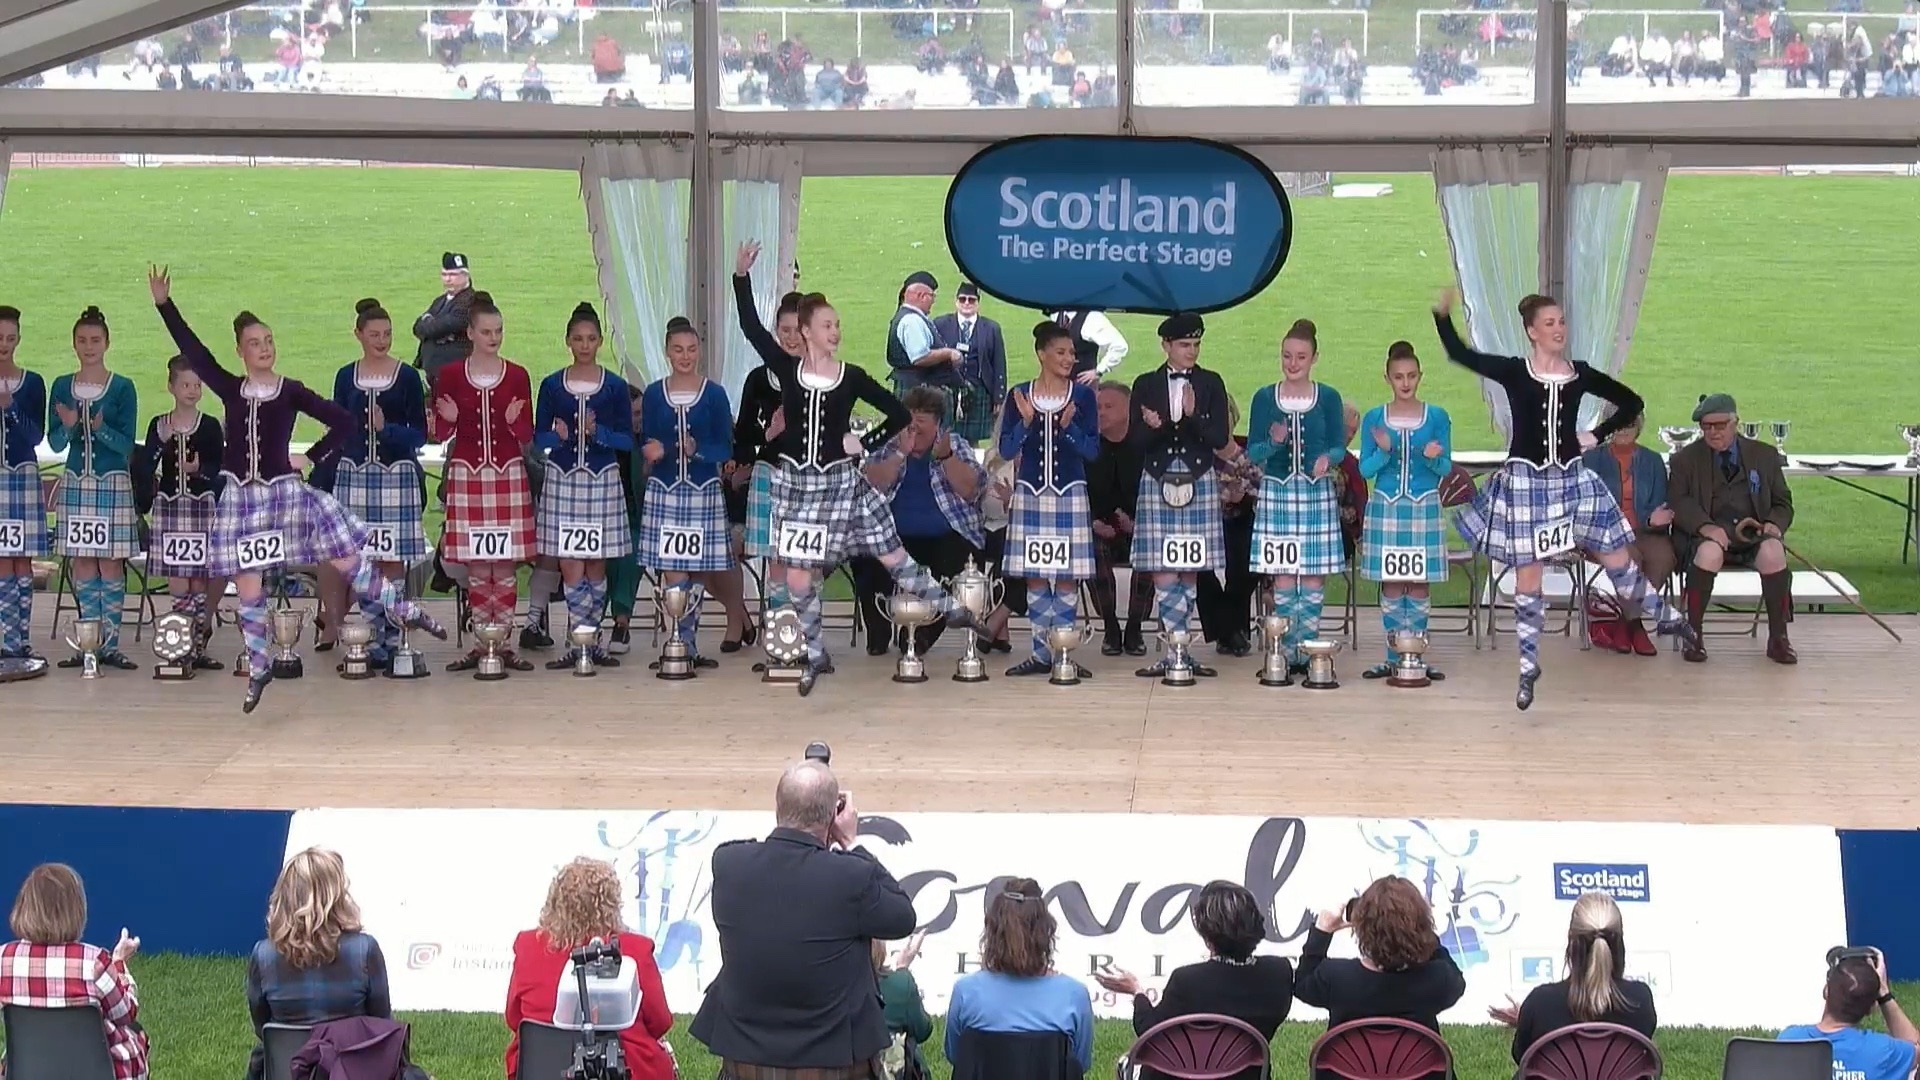 Monetise Live Streams by Harnessing the Highland Dancing Passion